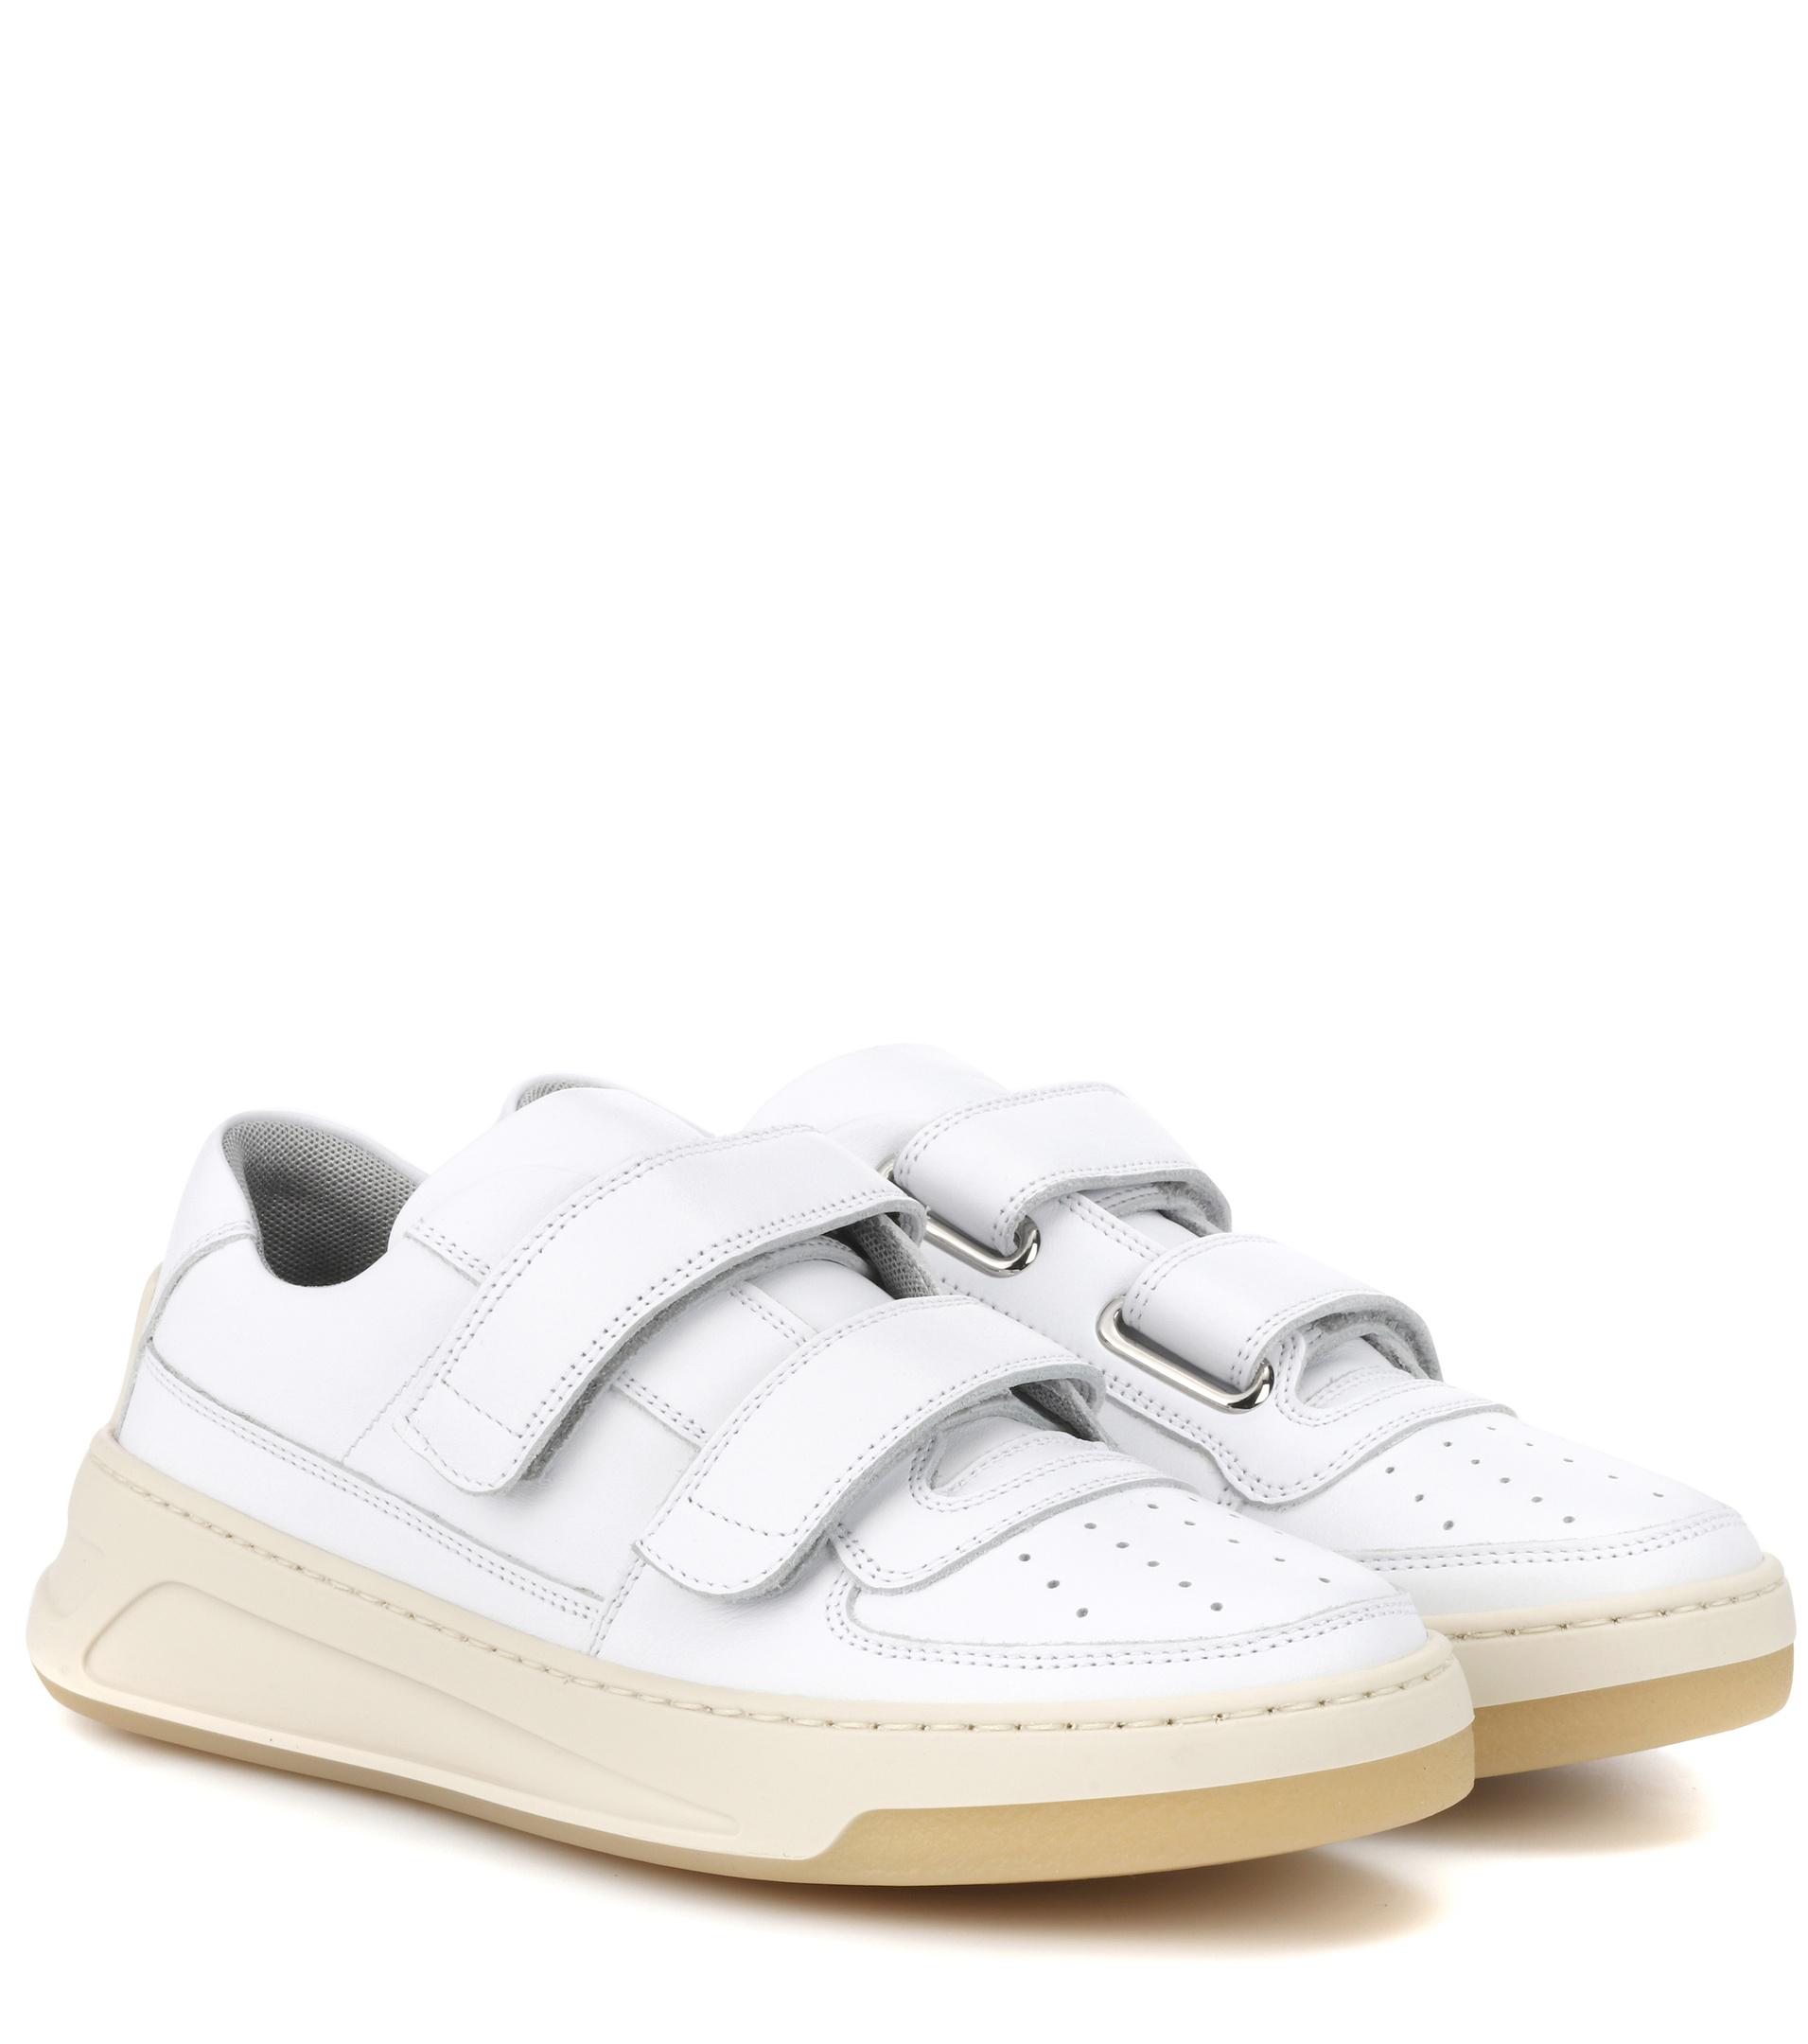 Acne Studios Steffey Leather Sneakers In White Save 40 Lyst